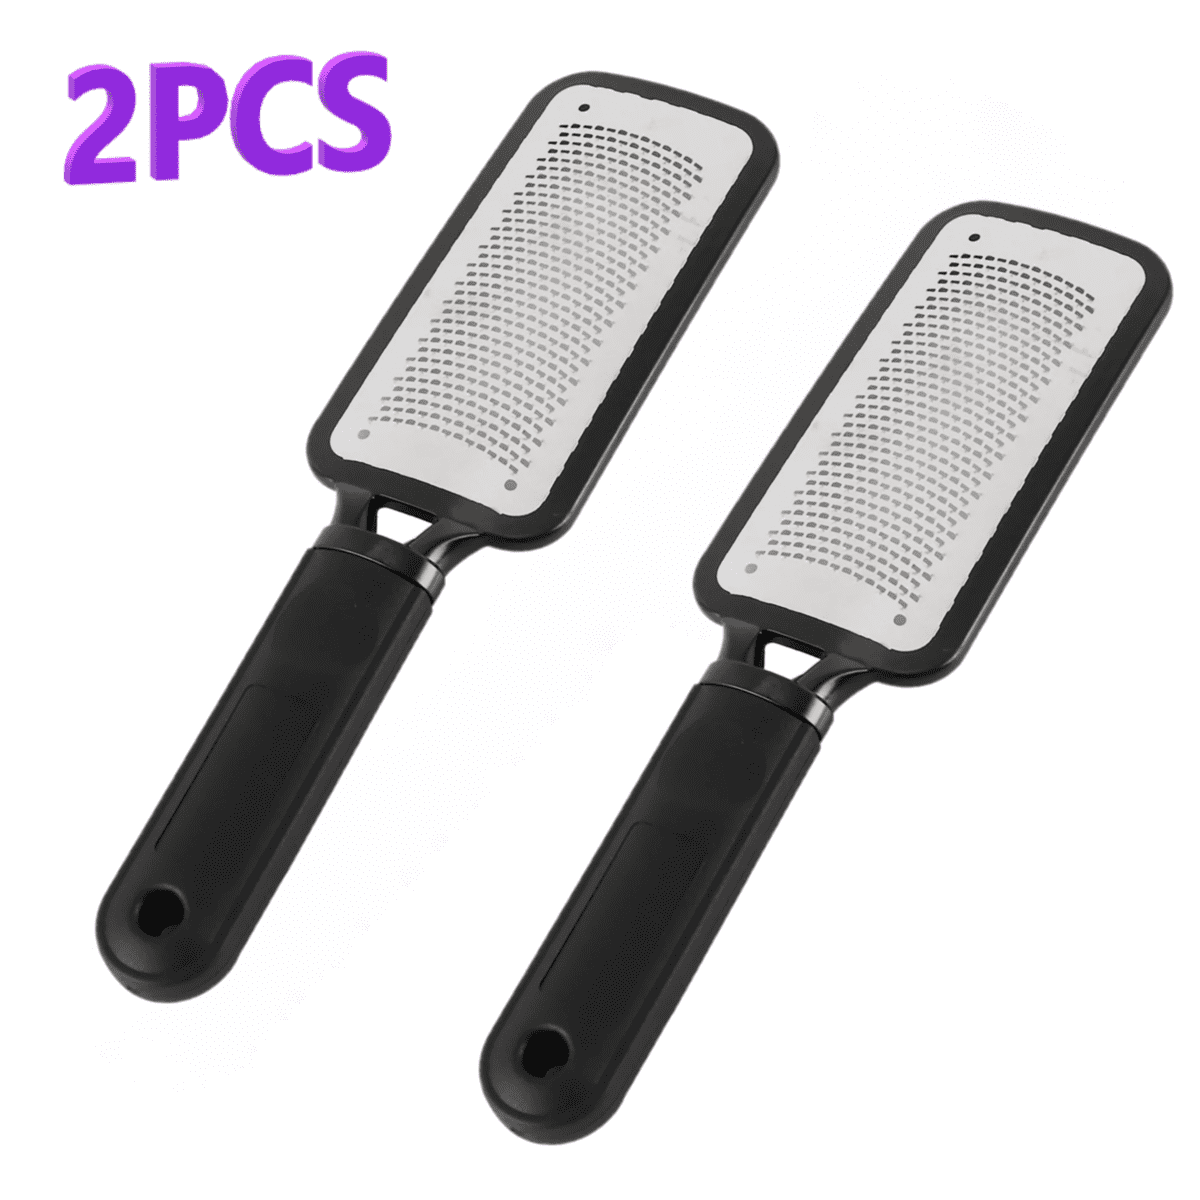 Tcwhniev Foot File Callus Remover, Premium Foot Rasp to Remove Hard Skin on  Both Wet/Dry Feet. Surgical Grade Stainless Steel File（2PCS）